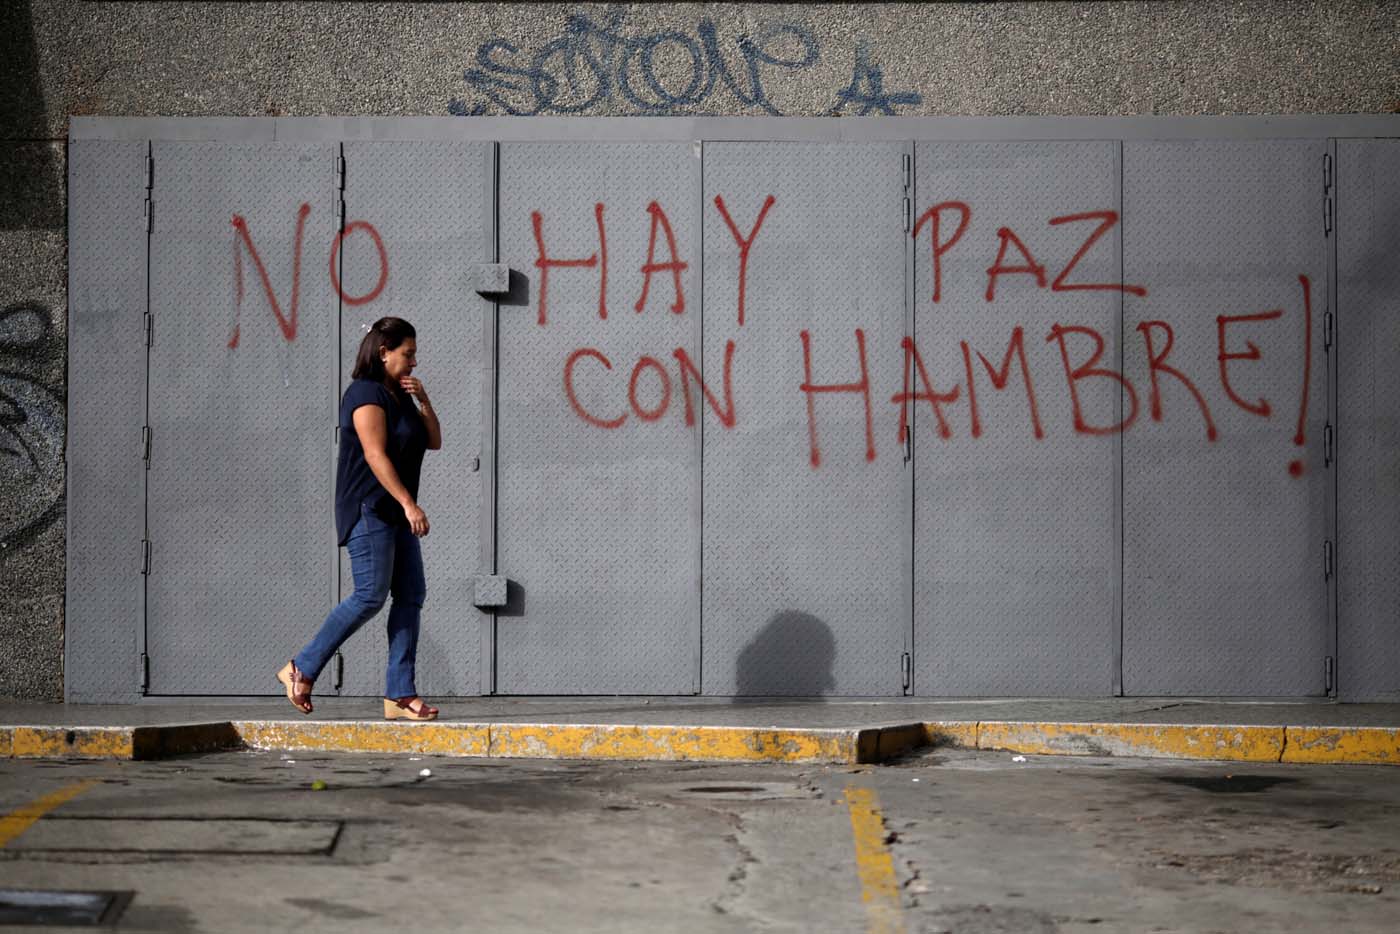 A woman walks in front of a graffiti that reads "There is no peace with hunger" during a strike called to protest against Venezuelan President Nicolas Maduro's government in Caracas, Venezuela, July 20, 2017. REUTERS/Marco Bello